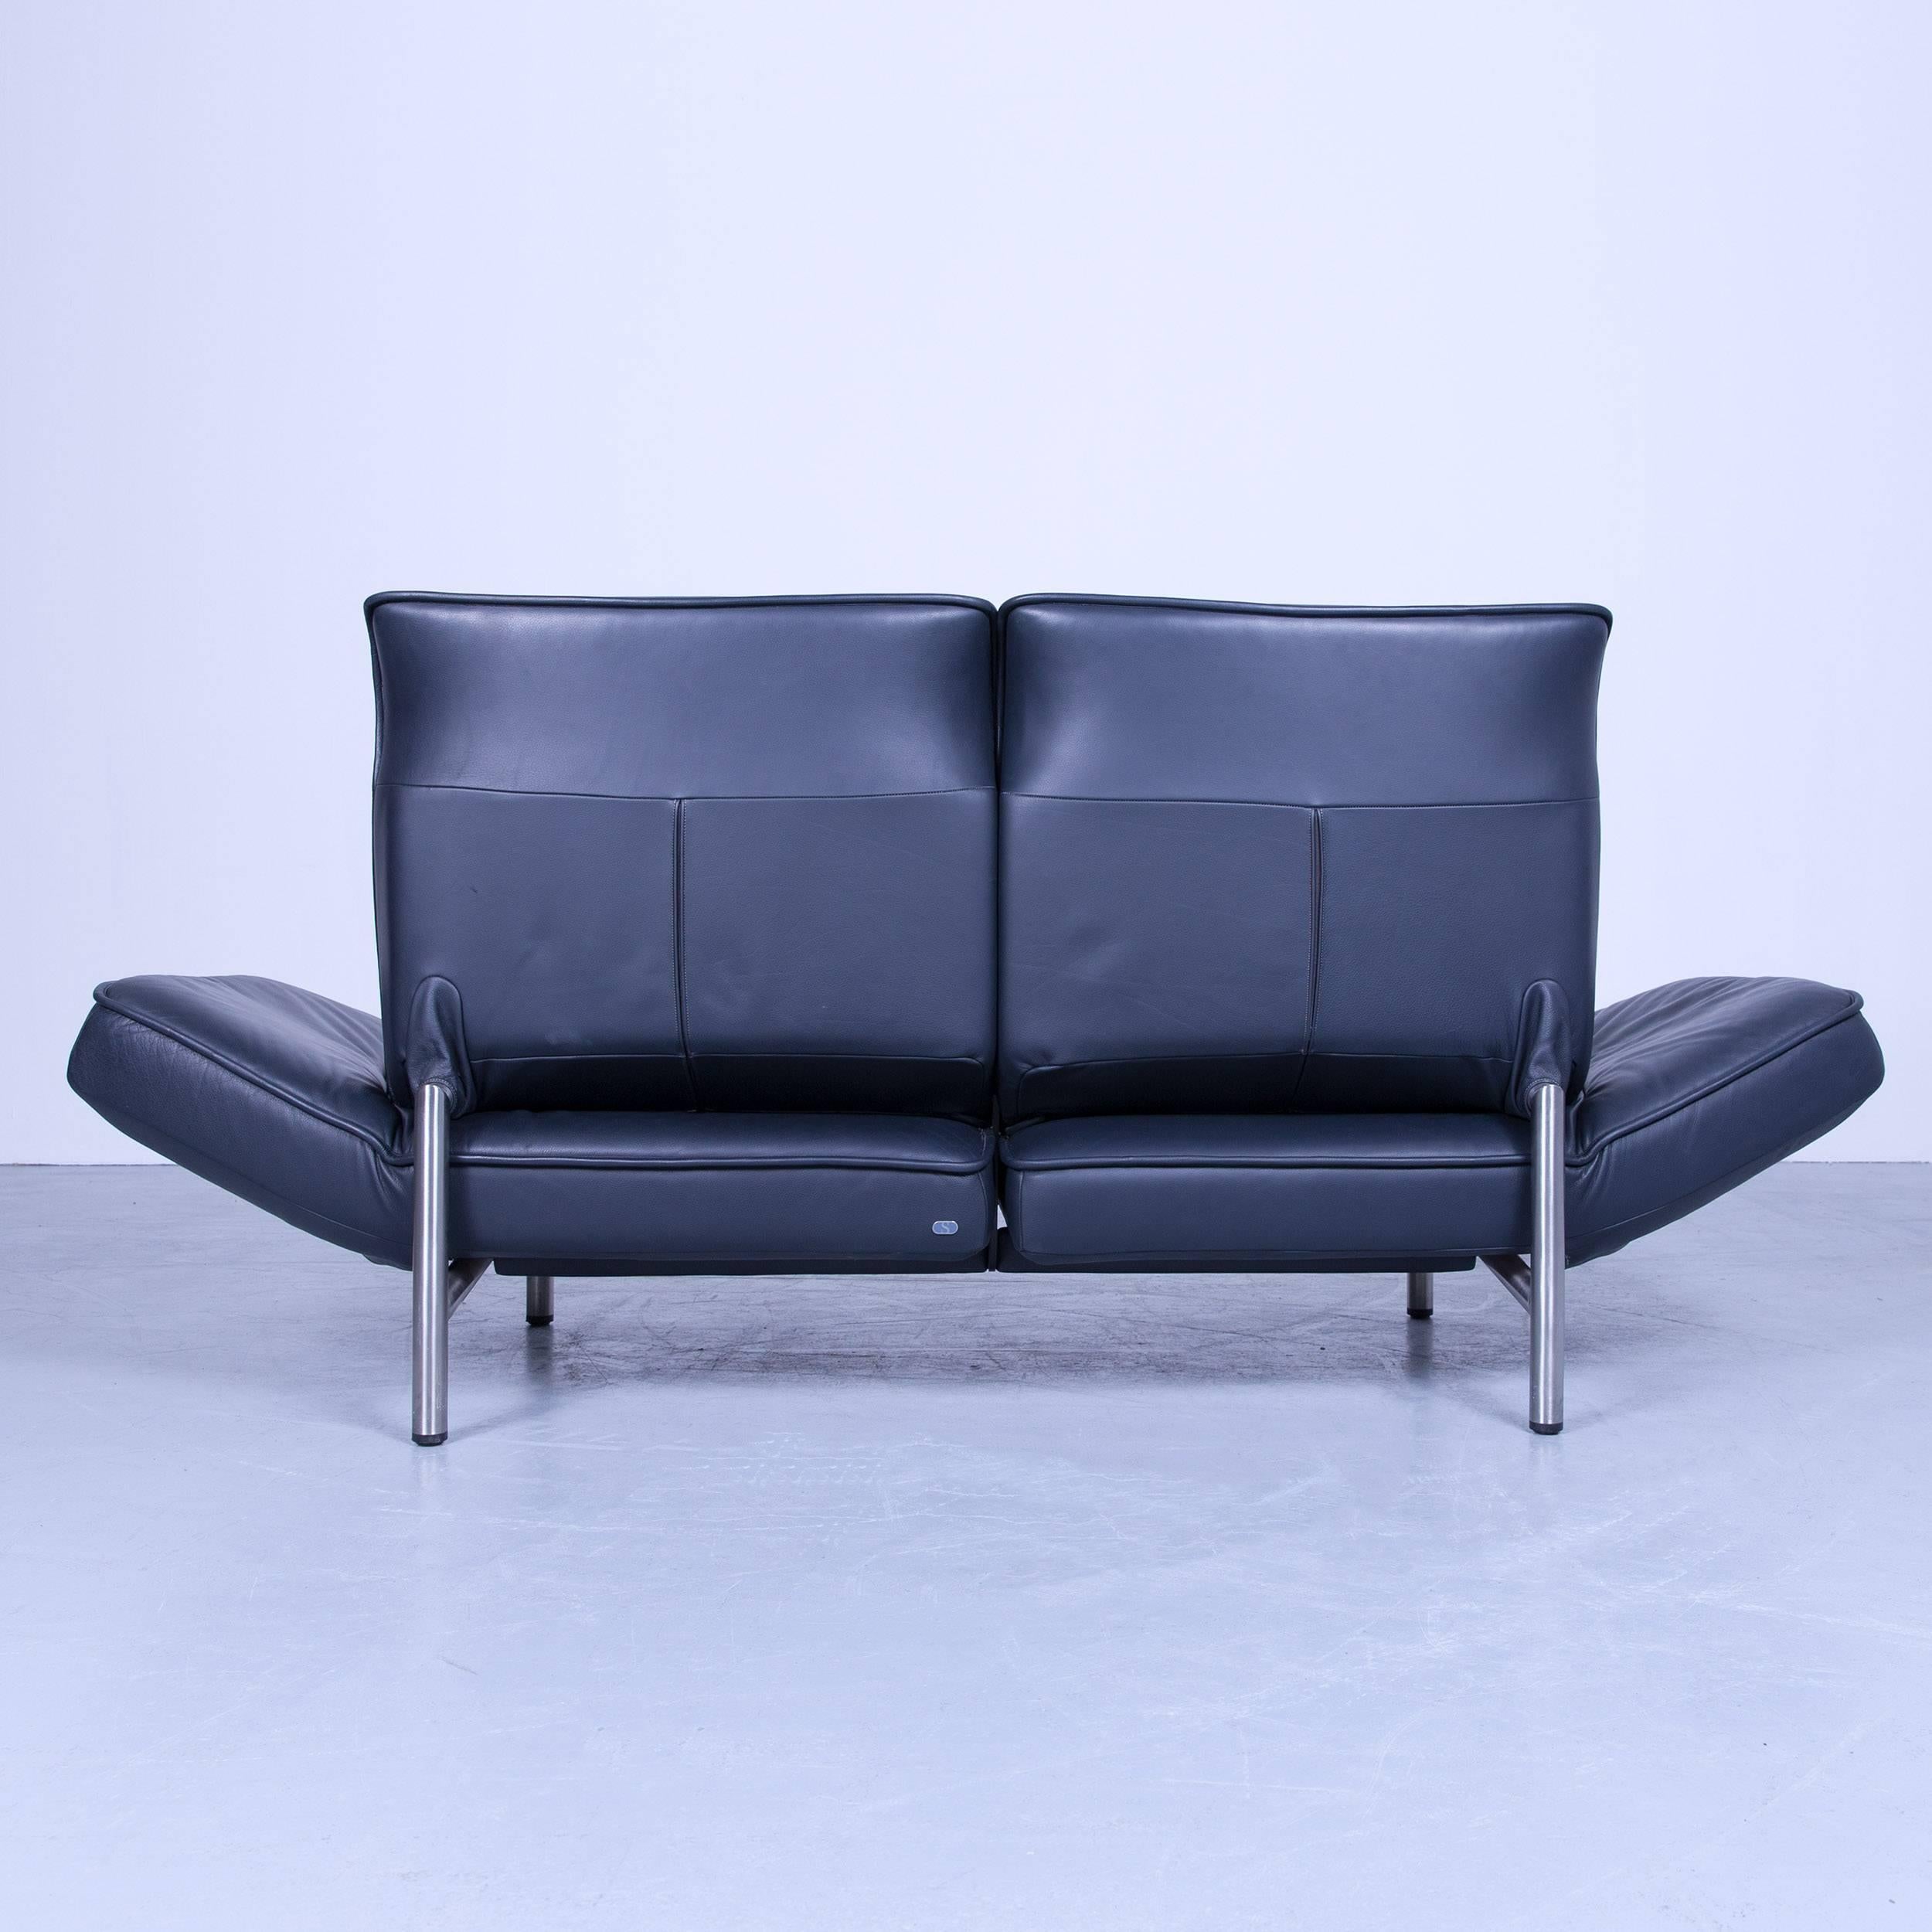 De Sede Ds 450 Designer Leather Sofa Night Blue Relax Function Two-Seat Modern 5